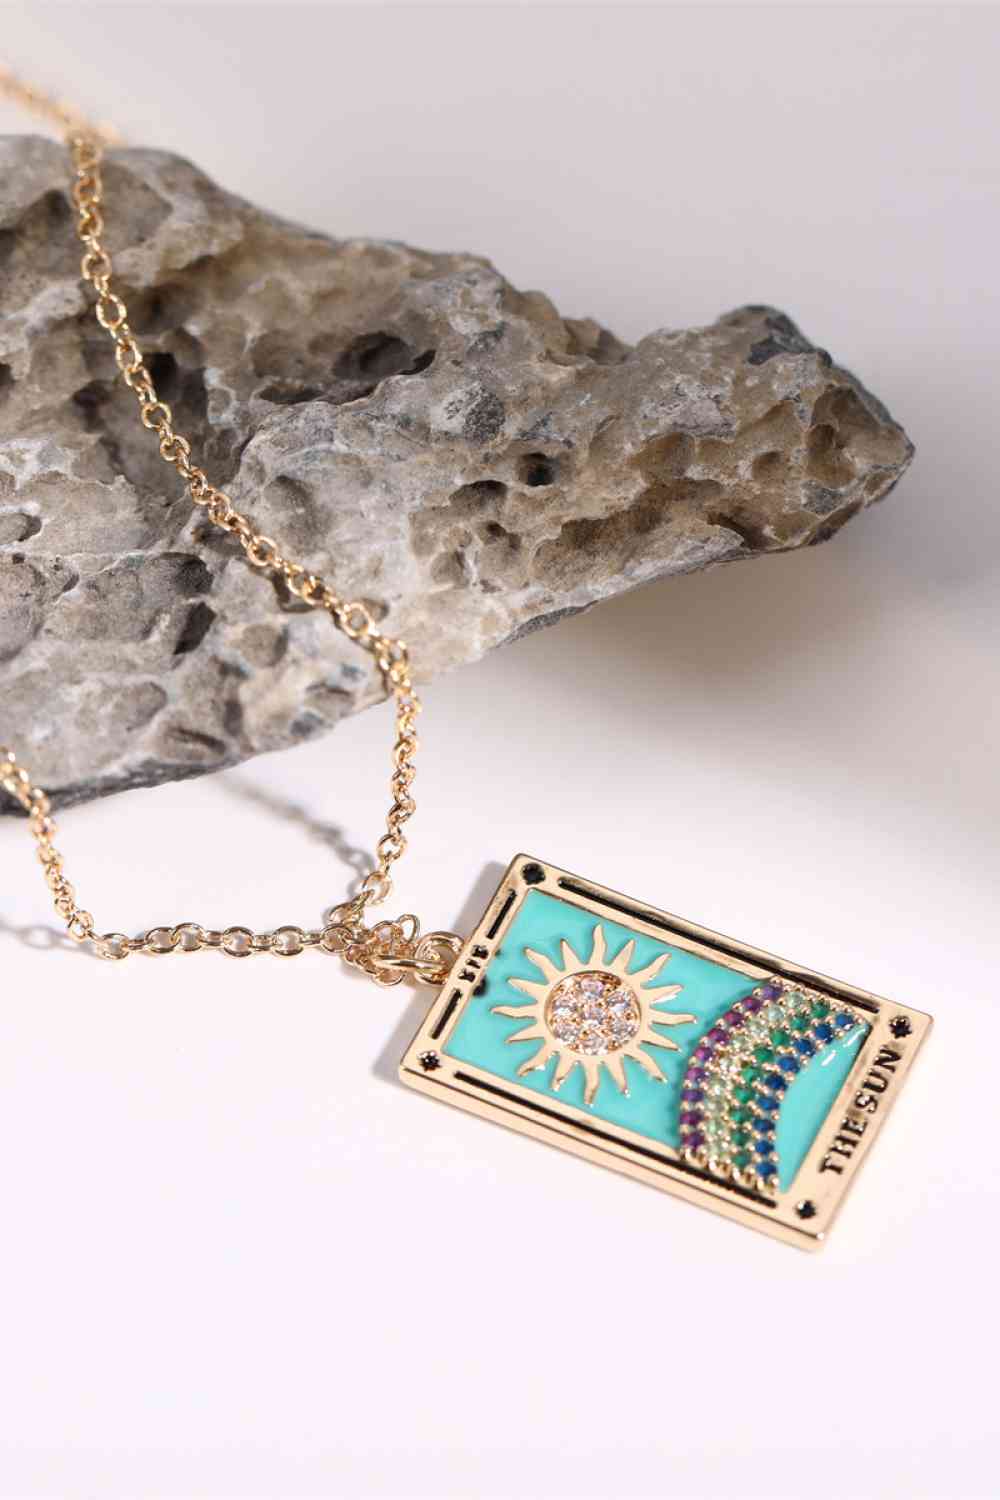 Tarot Card Pendant Stainless Steel Necklace BLUE ZONE PLANET